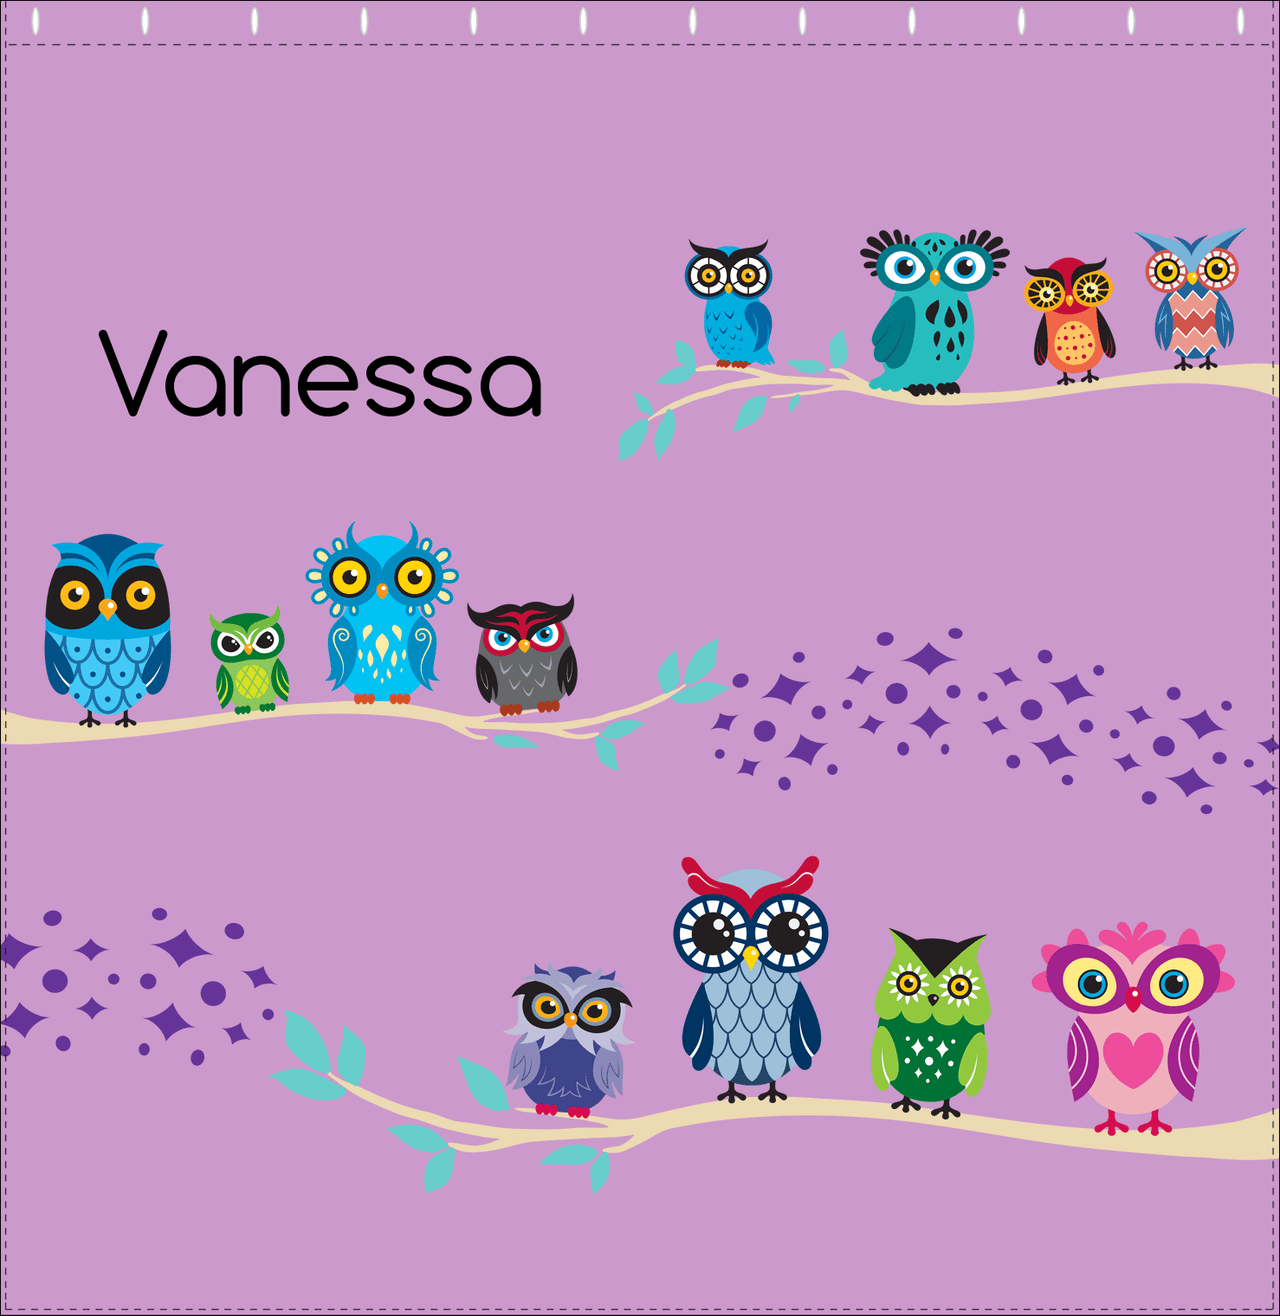 Personalized Owl Shower Curtain VIII - All Owls - Purple Background - Decorate View